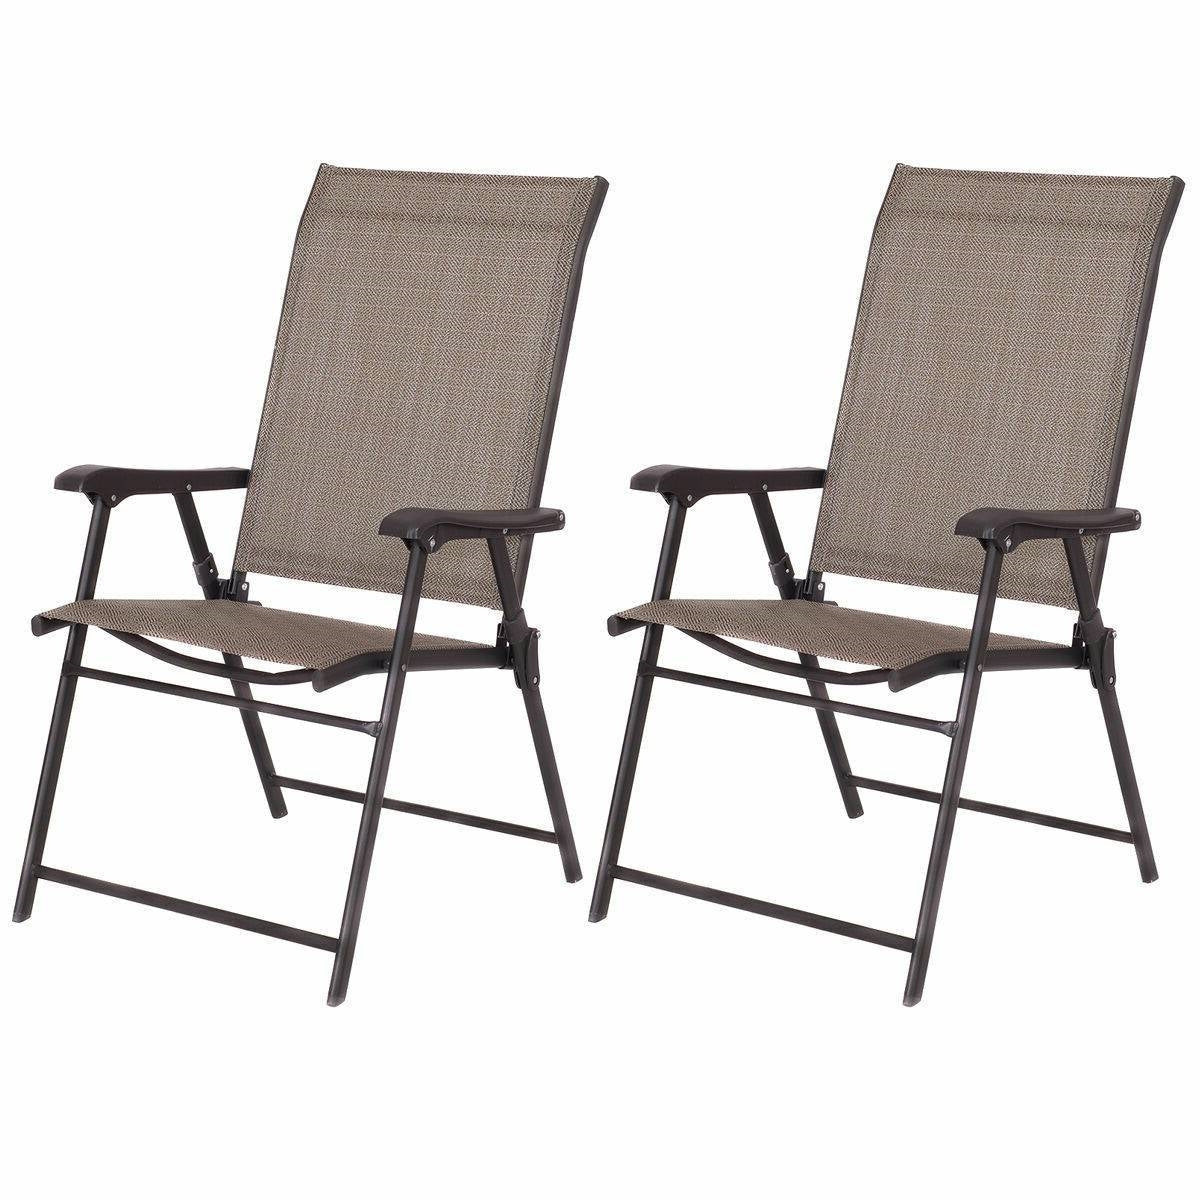 Outdoor > Outdoor Furniture > Patio Chairs - Set Of 2 Outdoor Folding Patio Chairs In Brown With Black Metal Frame